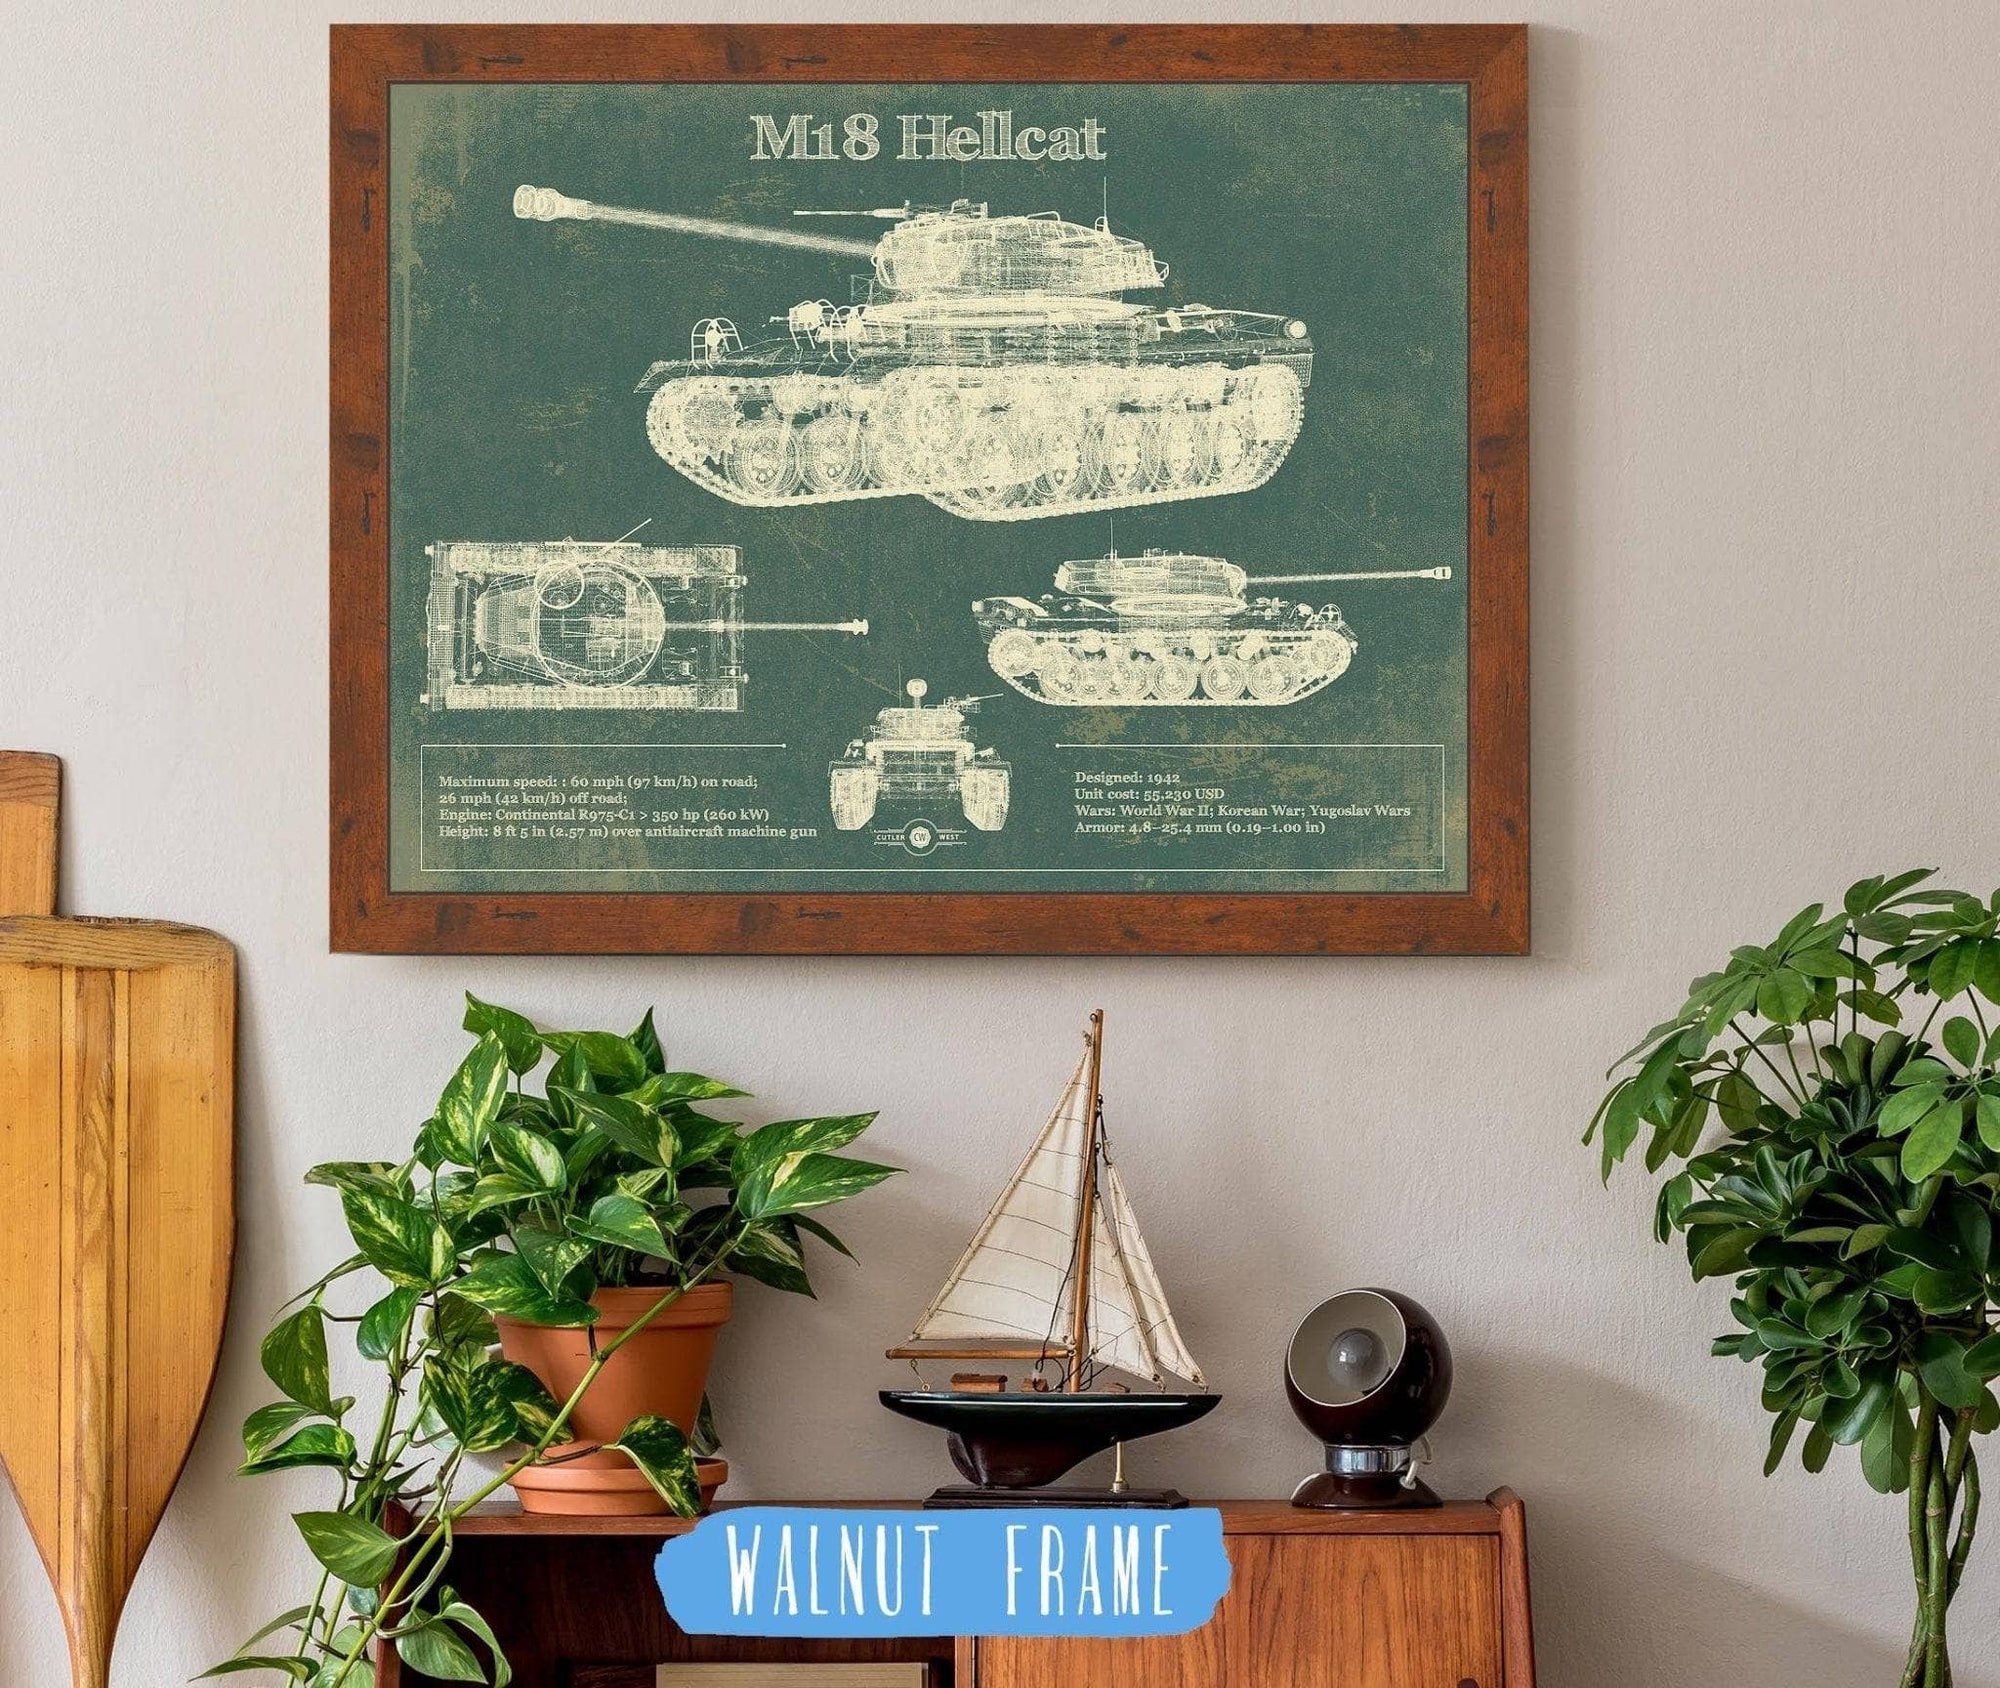 Cutler West Military Weapons Collection 14" x 11" / Walnut Frame M18 Hellcat Army Color Vintage Blueprint Print 845000225_64711